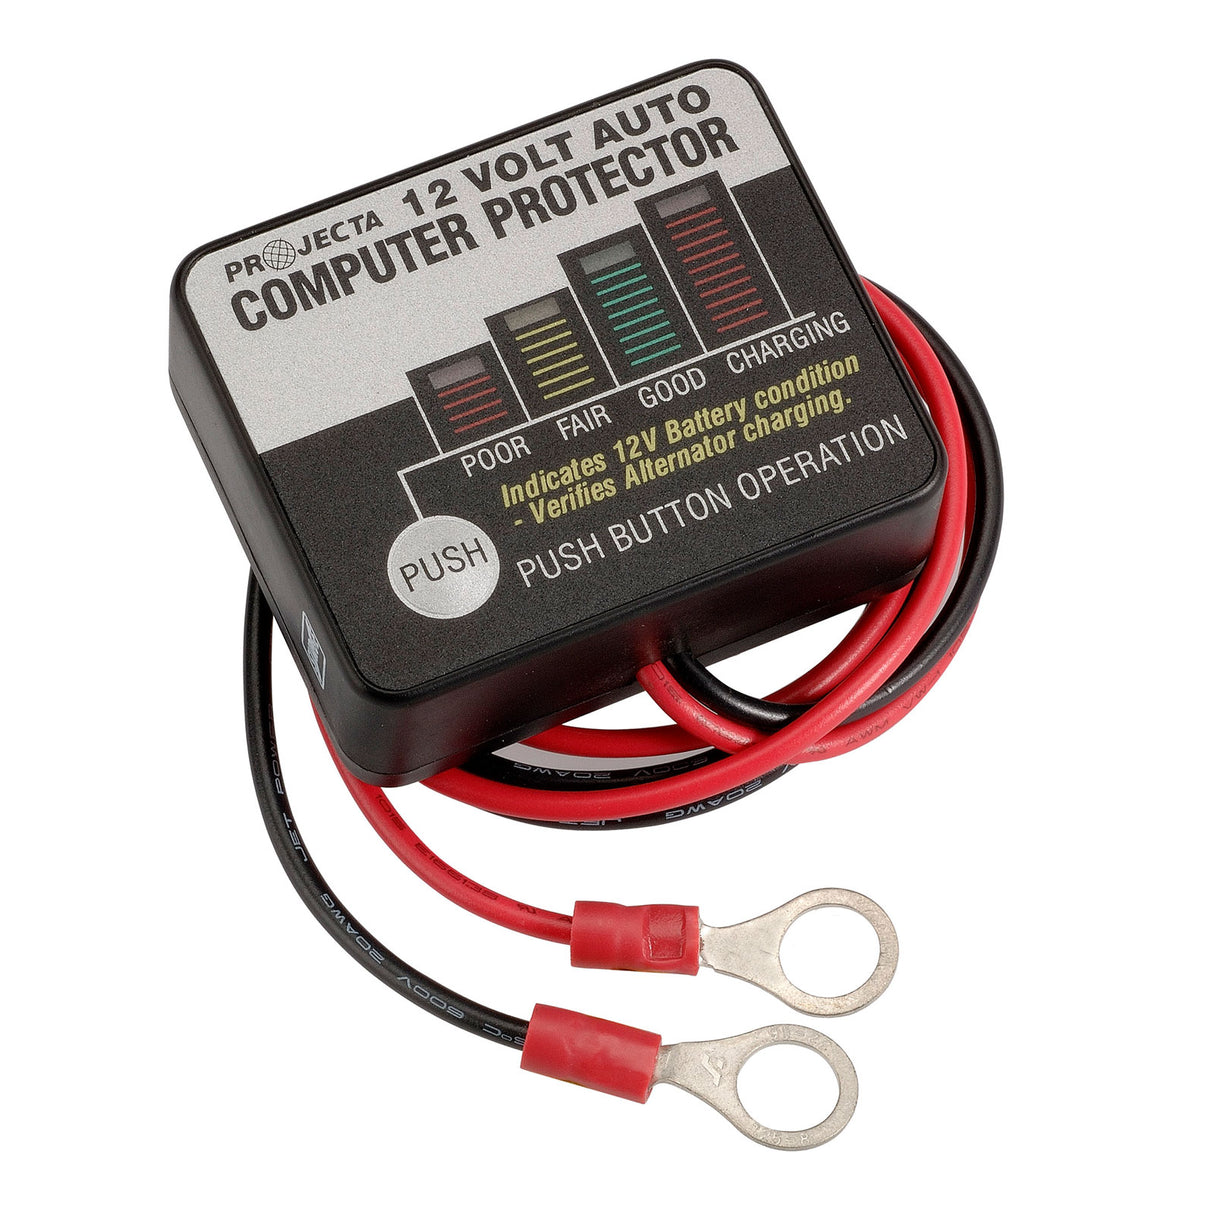 12V Surge Protector And Battery Analyser - Projecta | Universal Auto Spares